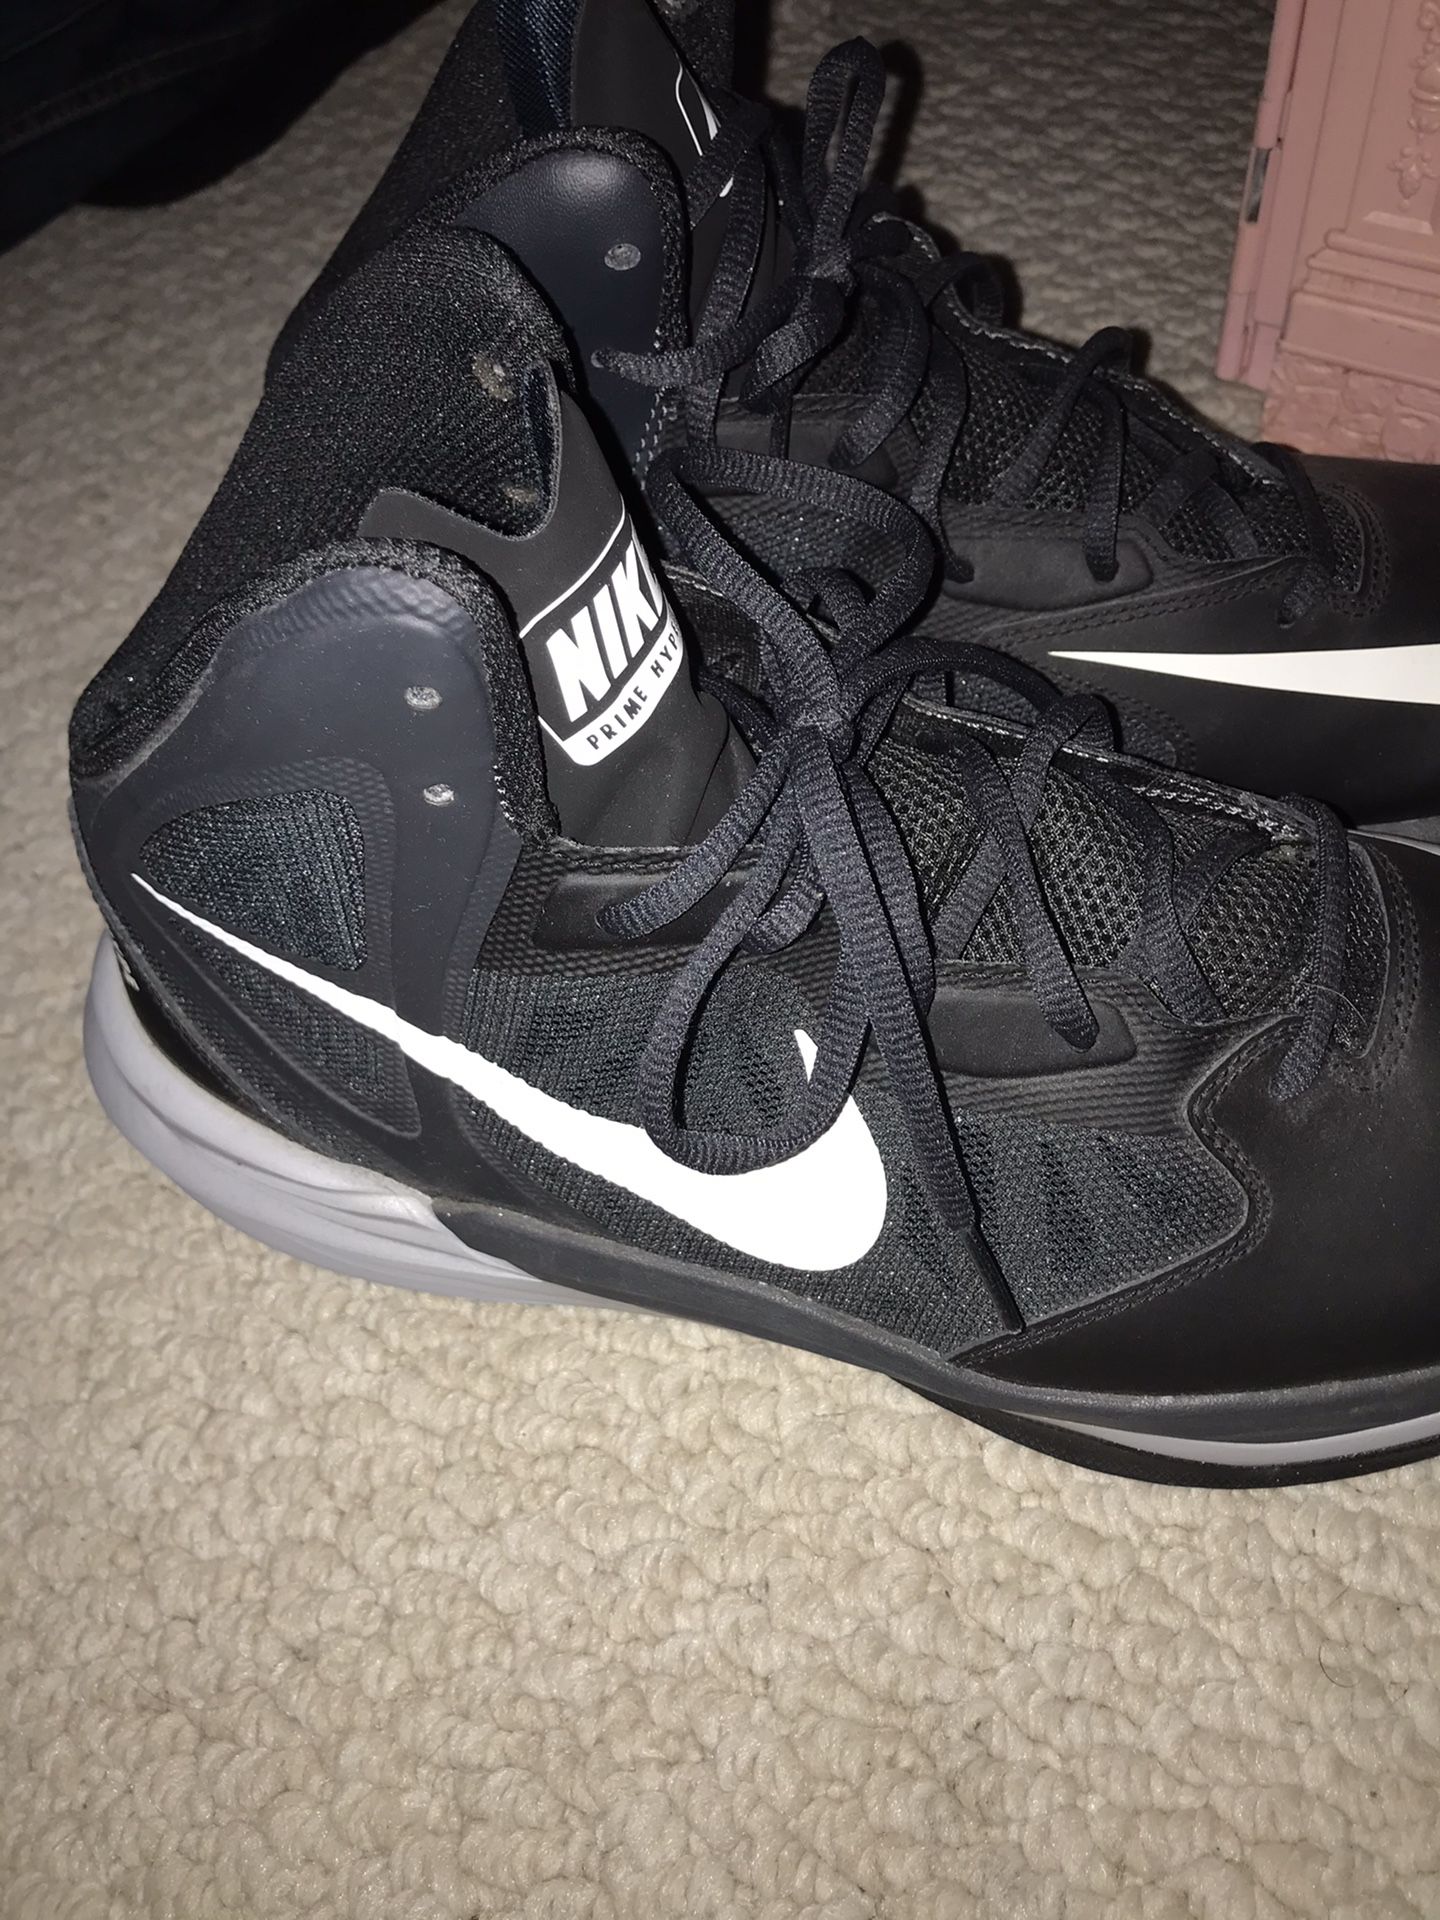 Nike men’s shoes size 9 great condition